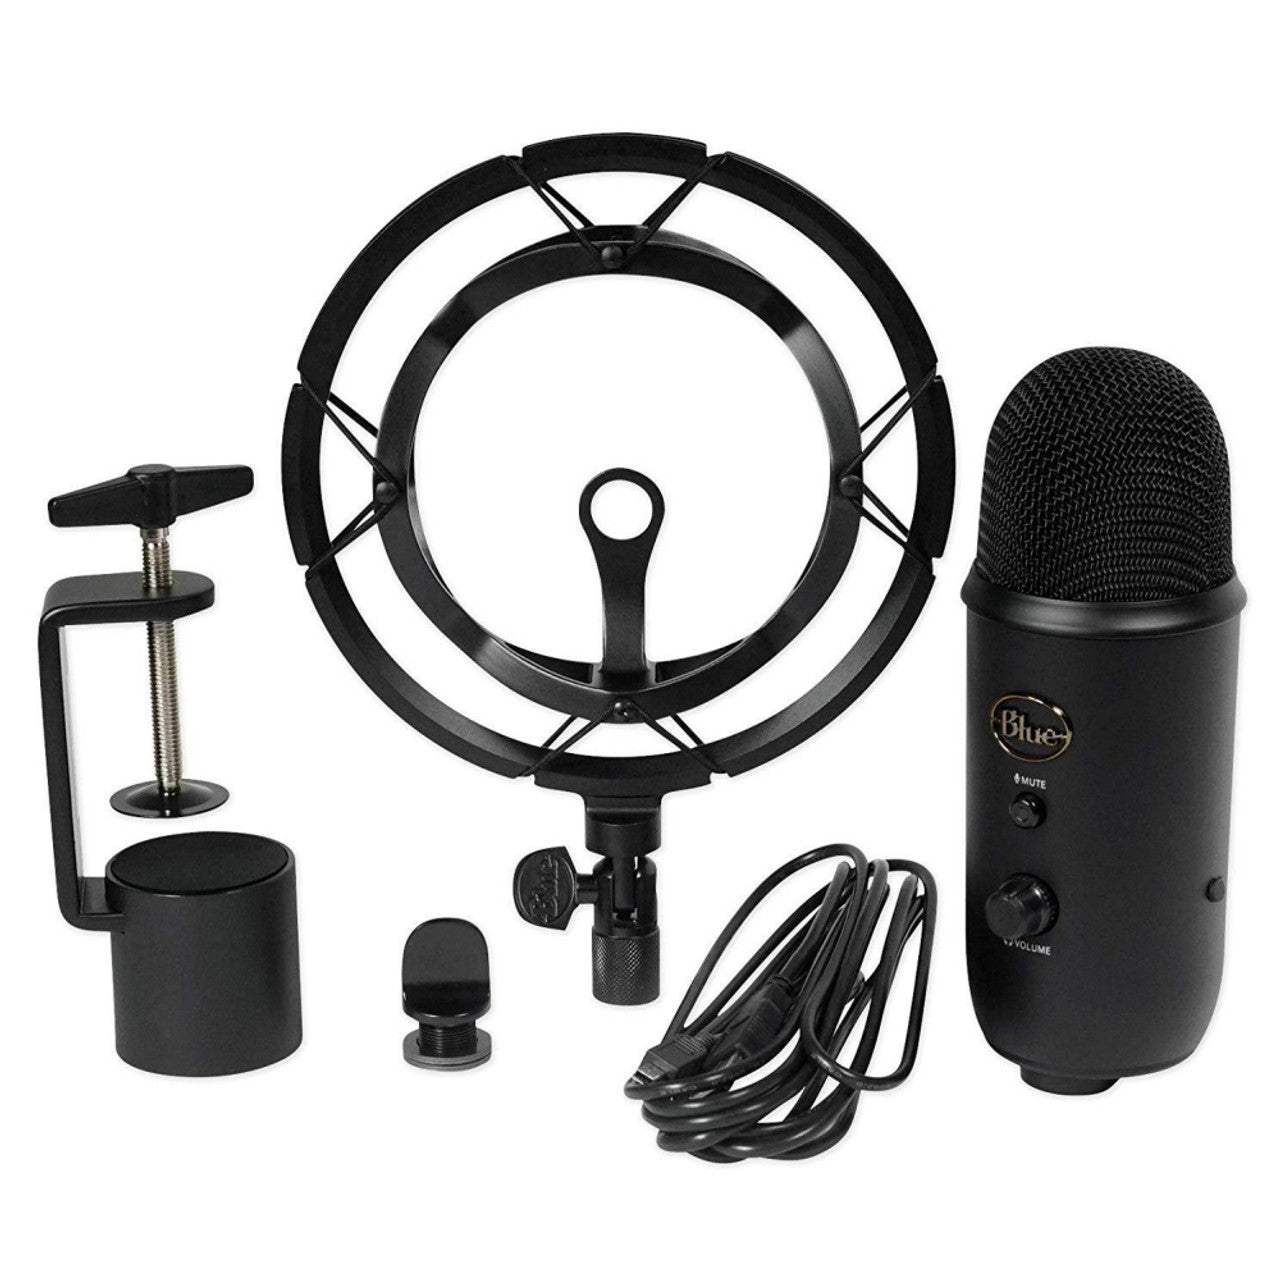 BLUE Yeticaster Pro Streaming Bundle with Yeti USB Microphone, Radius III and Compass